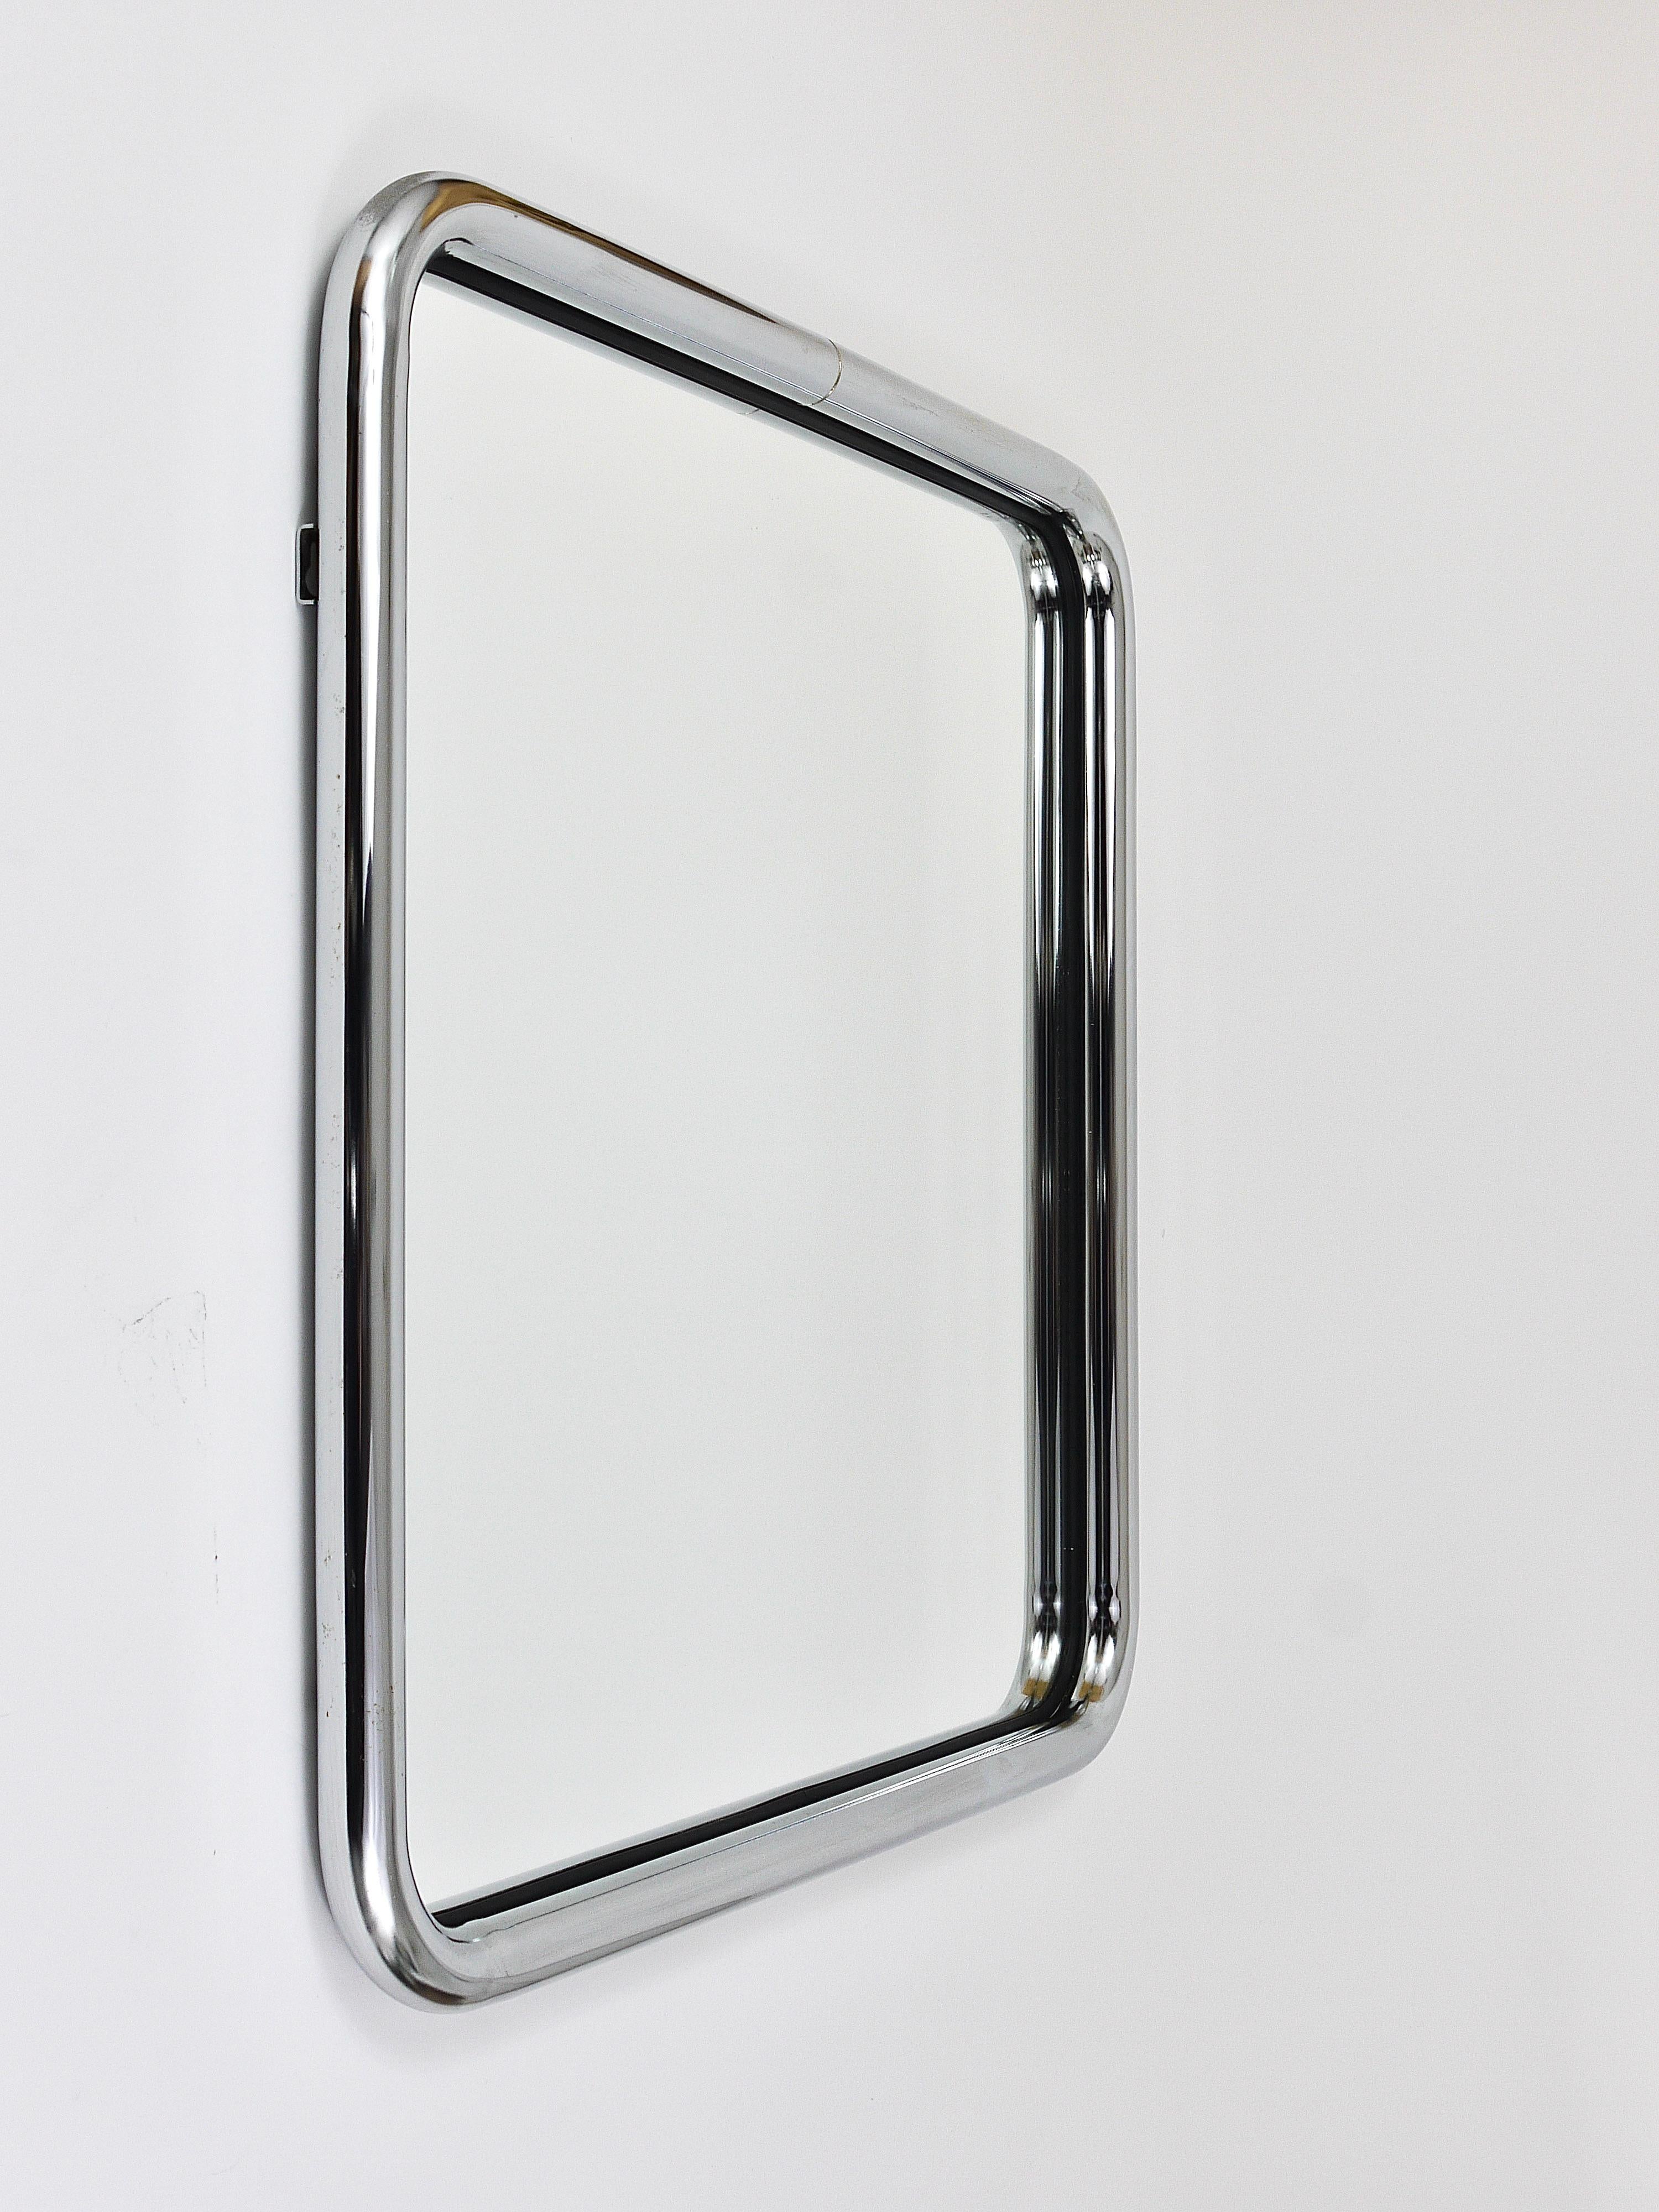 British Post-Modern Square Chromed Tubular Steel Wall Mirror from the 1970s